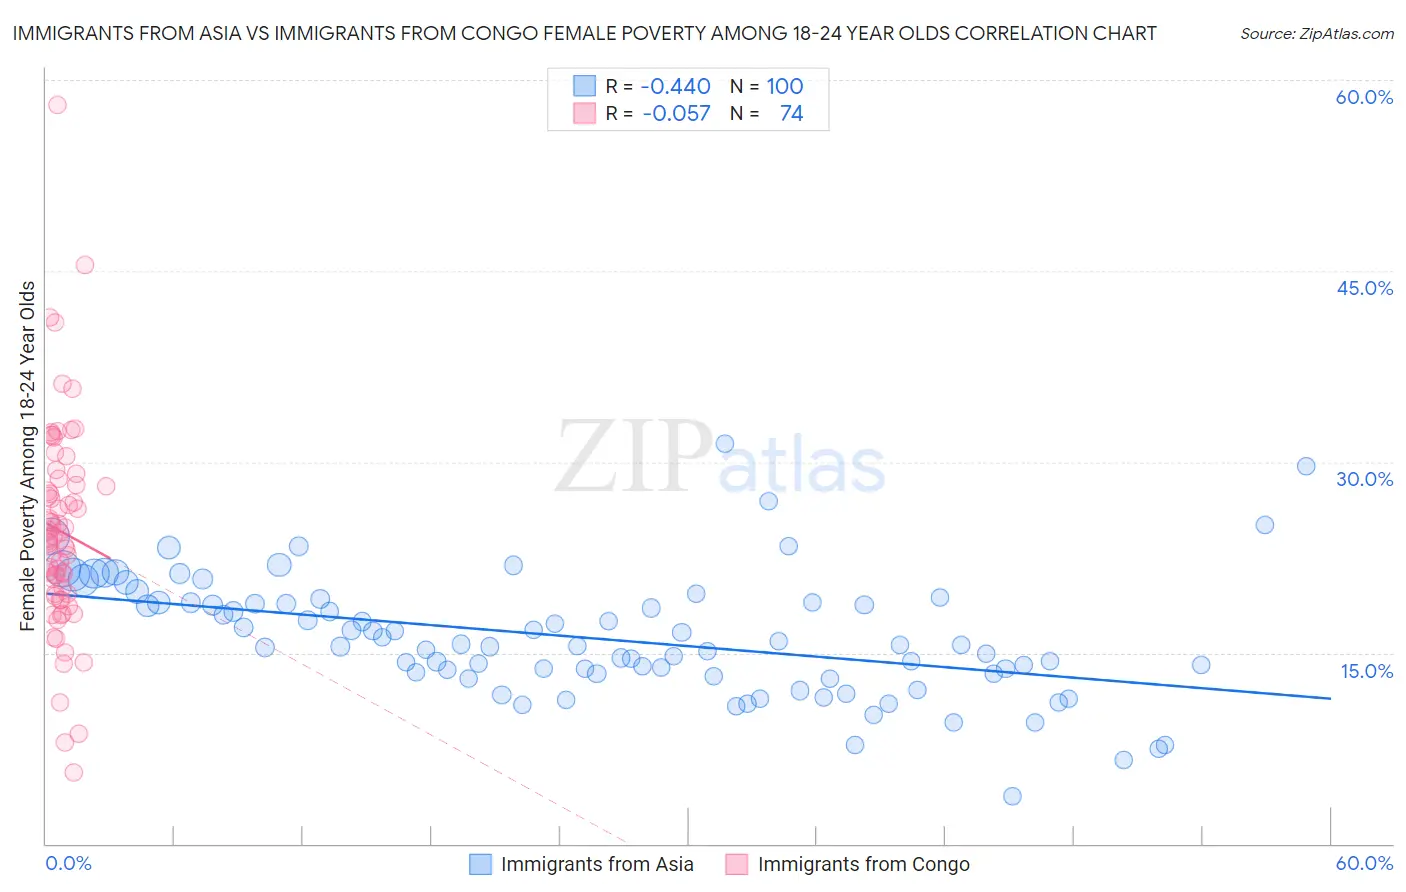 Immigrants from Asia vs Immigrants from Congo Female Poverty Among 18-24 Year Olds